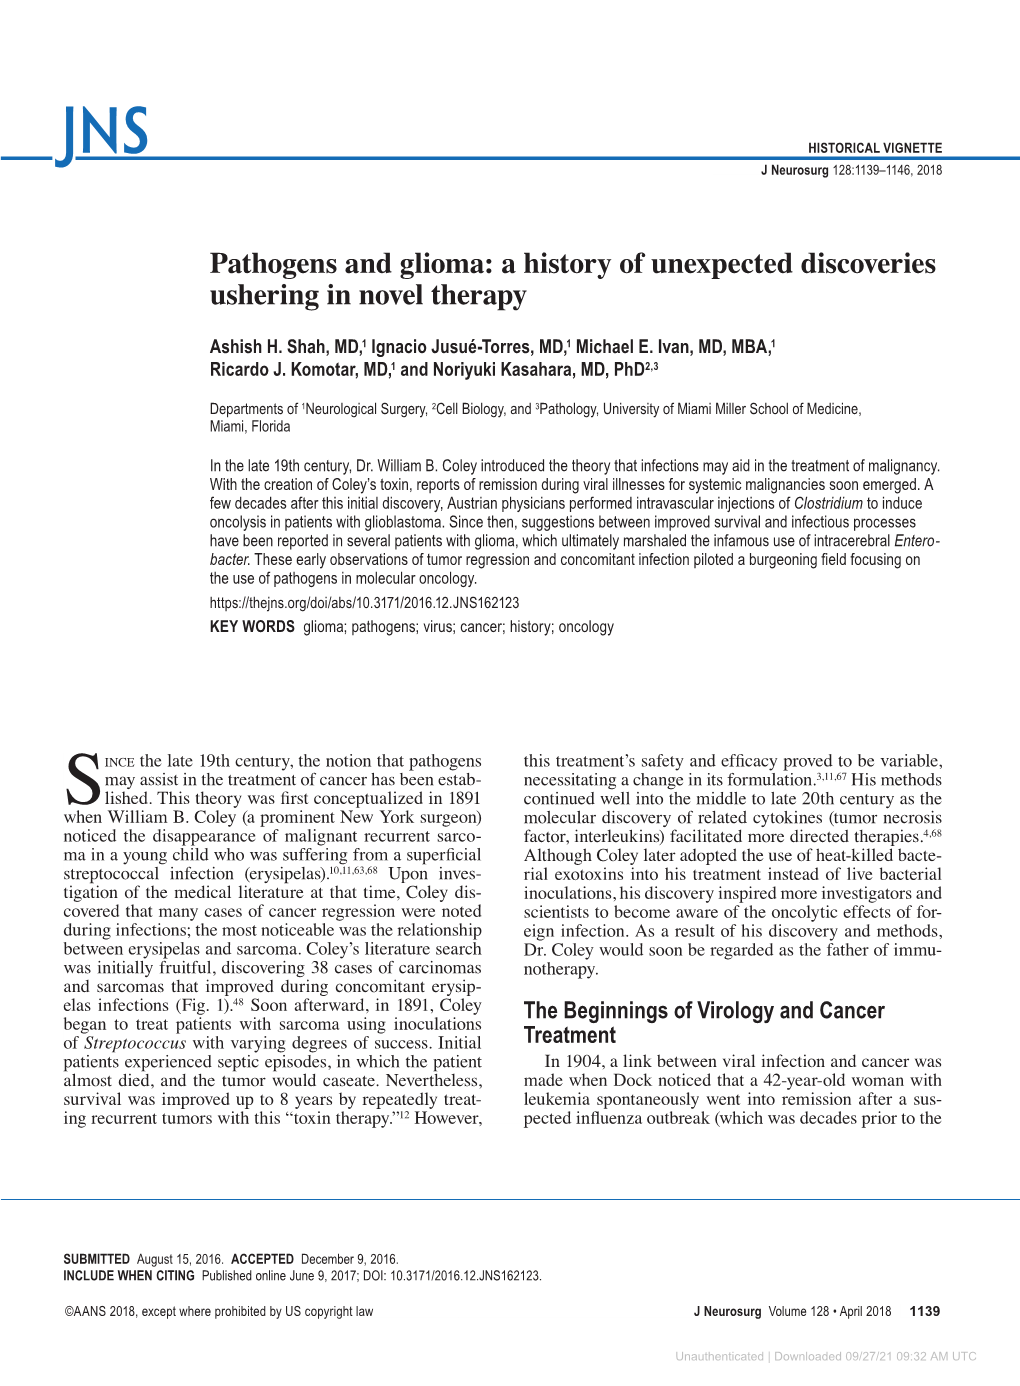 Pathogens and Glioma: a History of Unexpected Discoveries Ushering in Novel Therapy